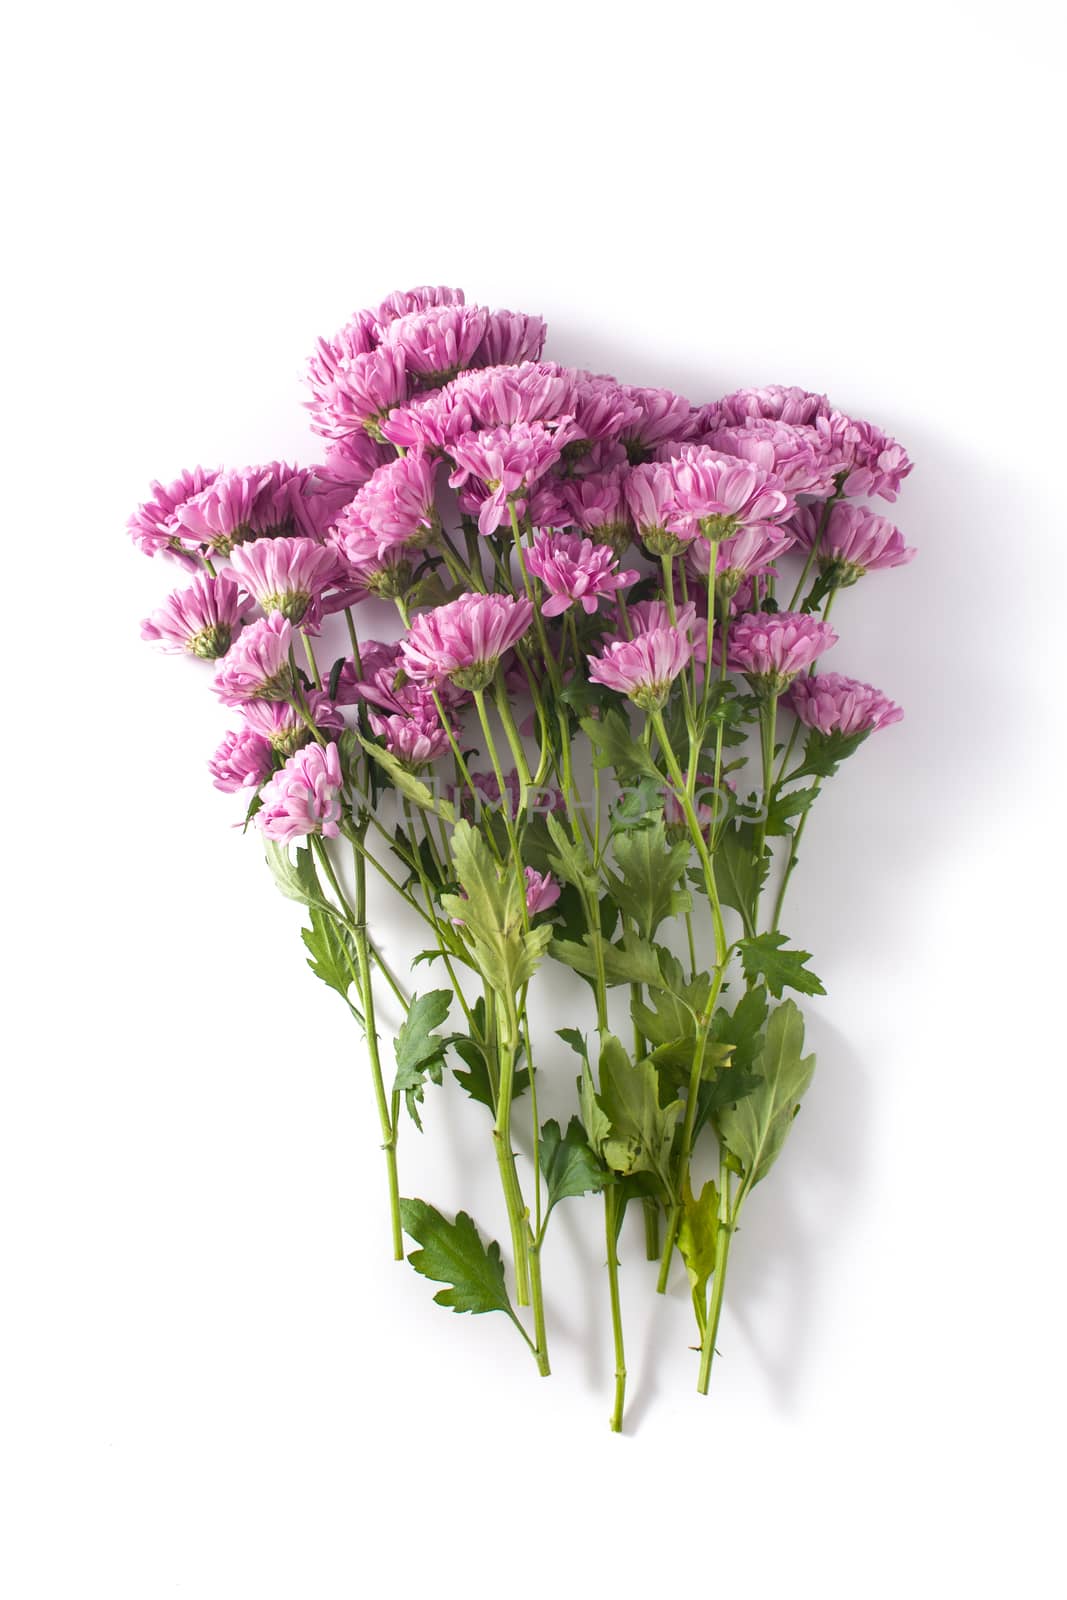 Violet chrysanthemum flowers bouquet isolated on white background